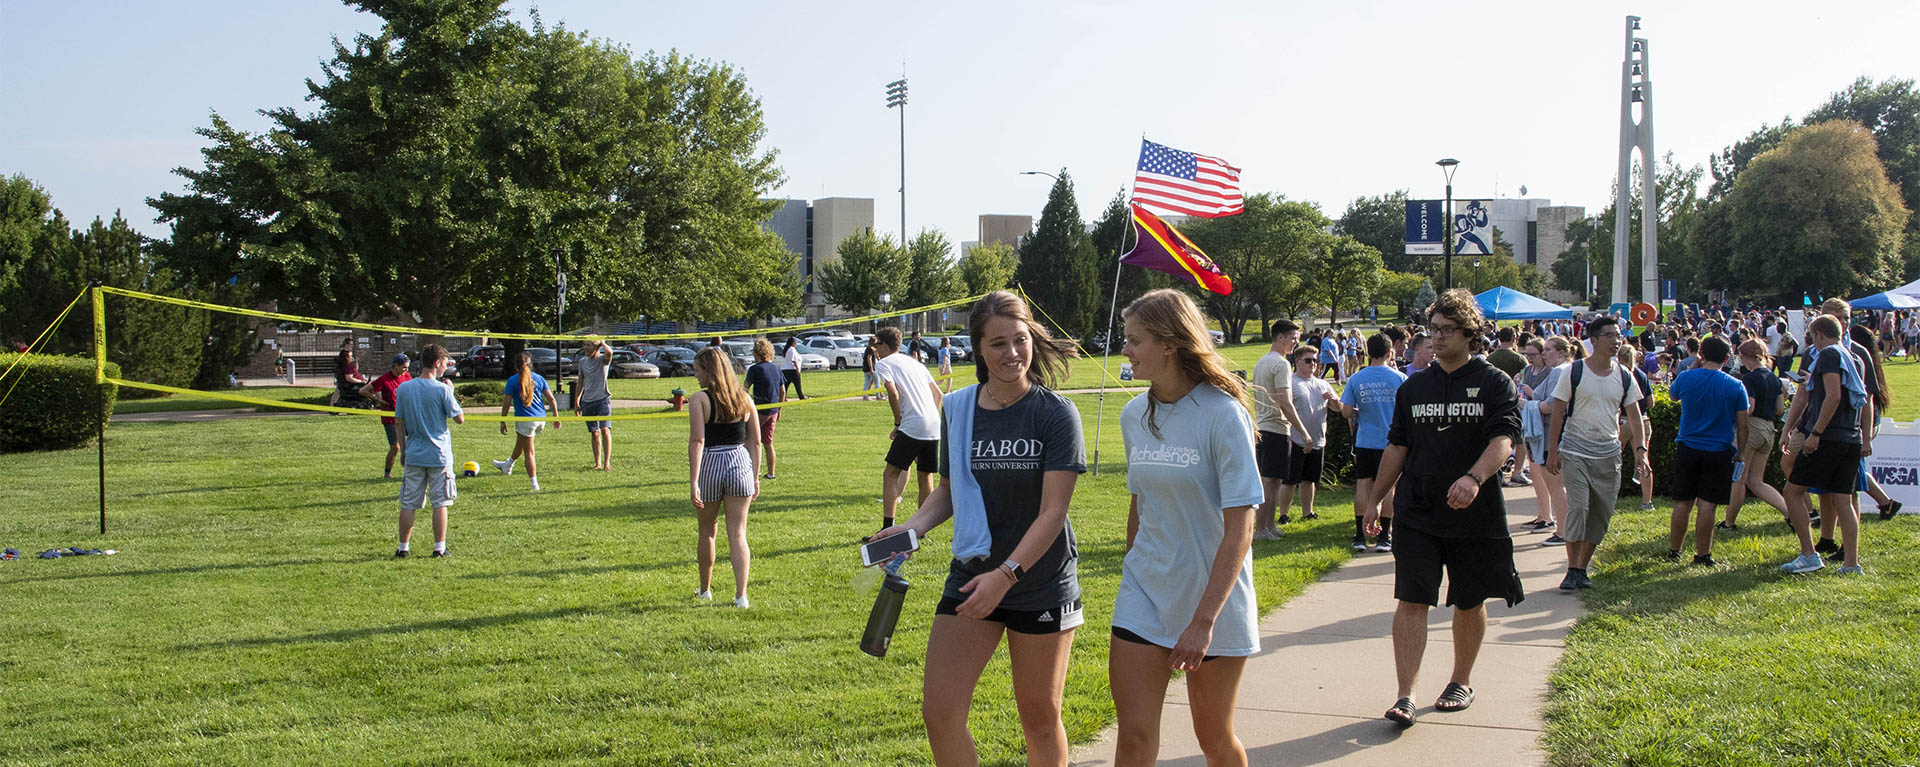 Students smile while walking on campus during an event.